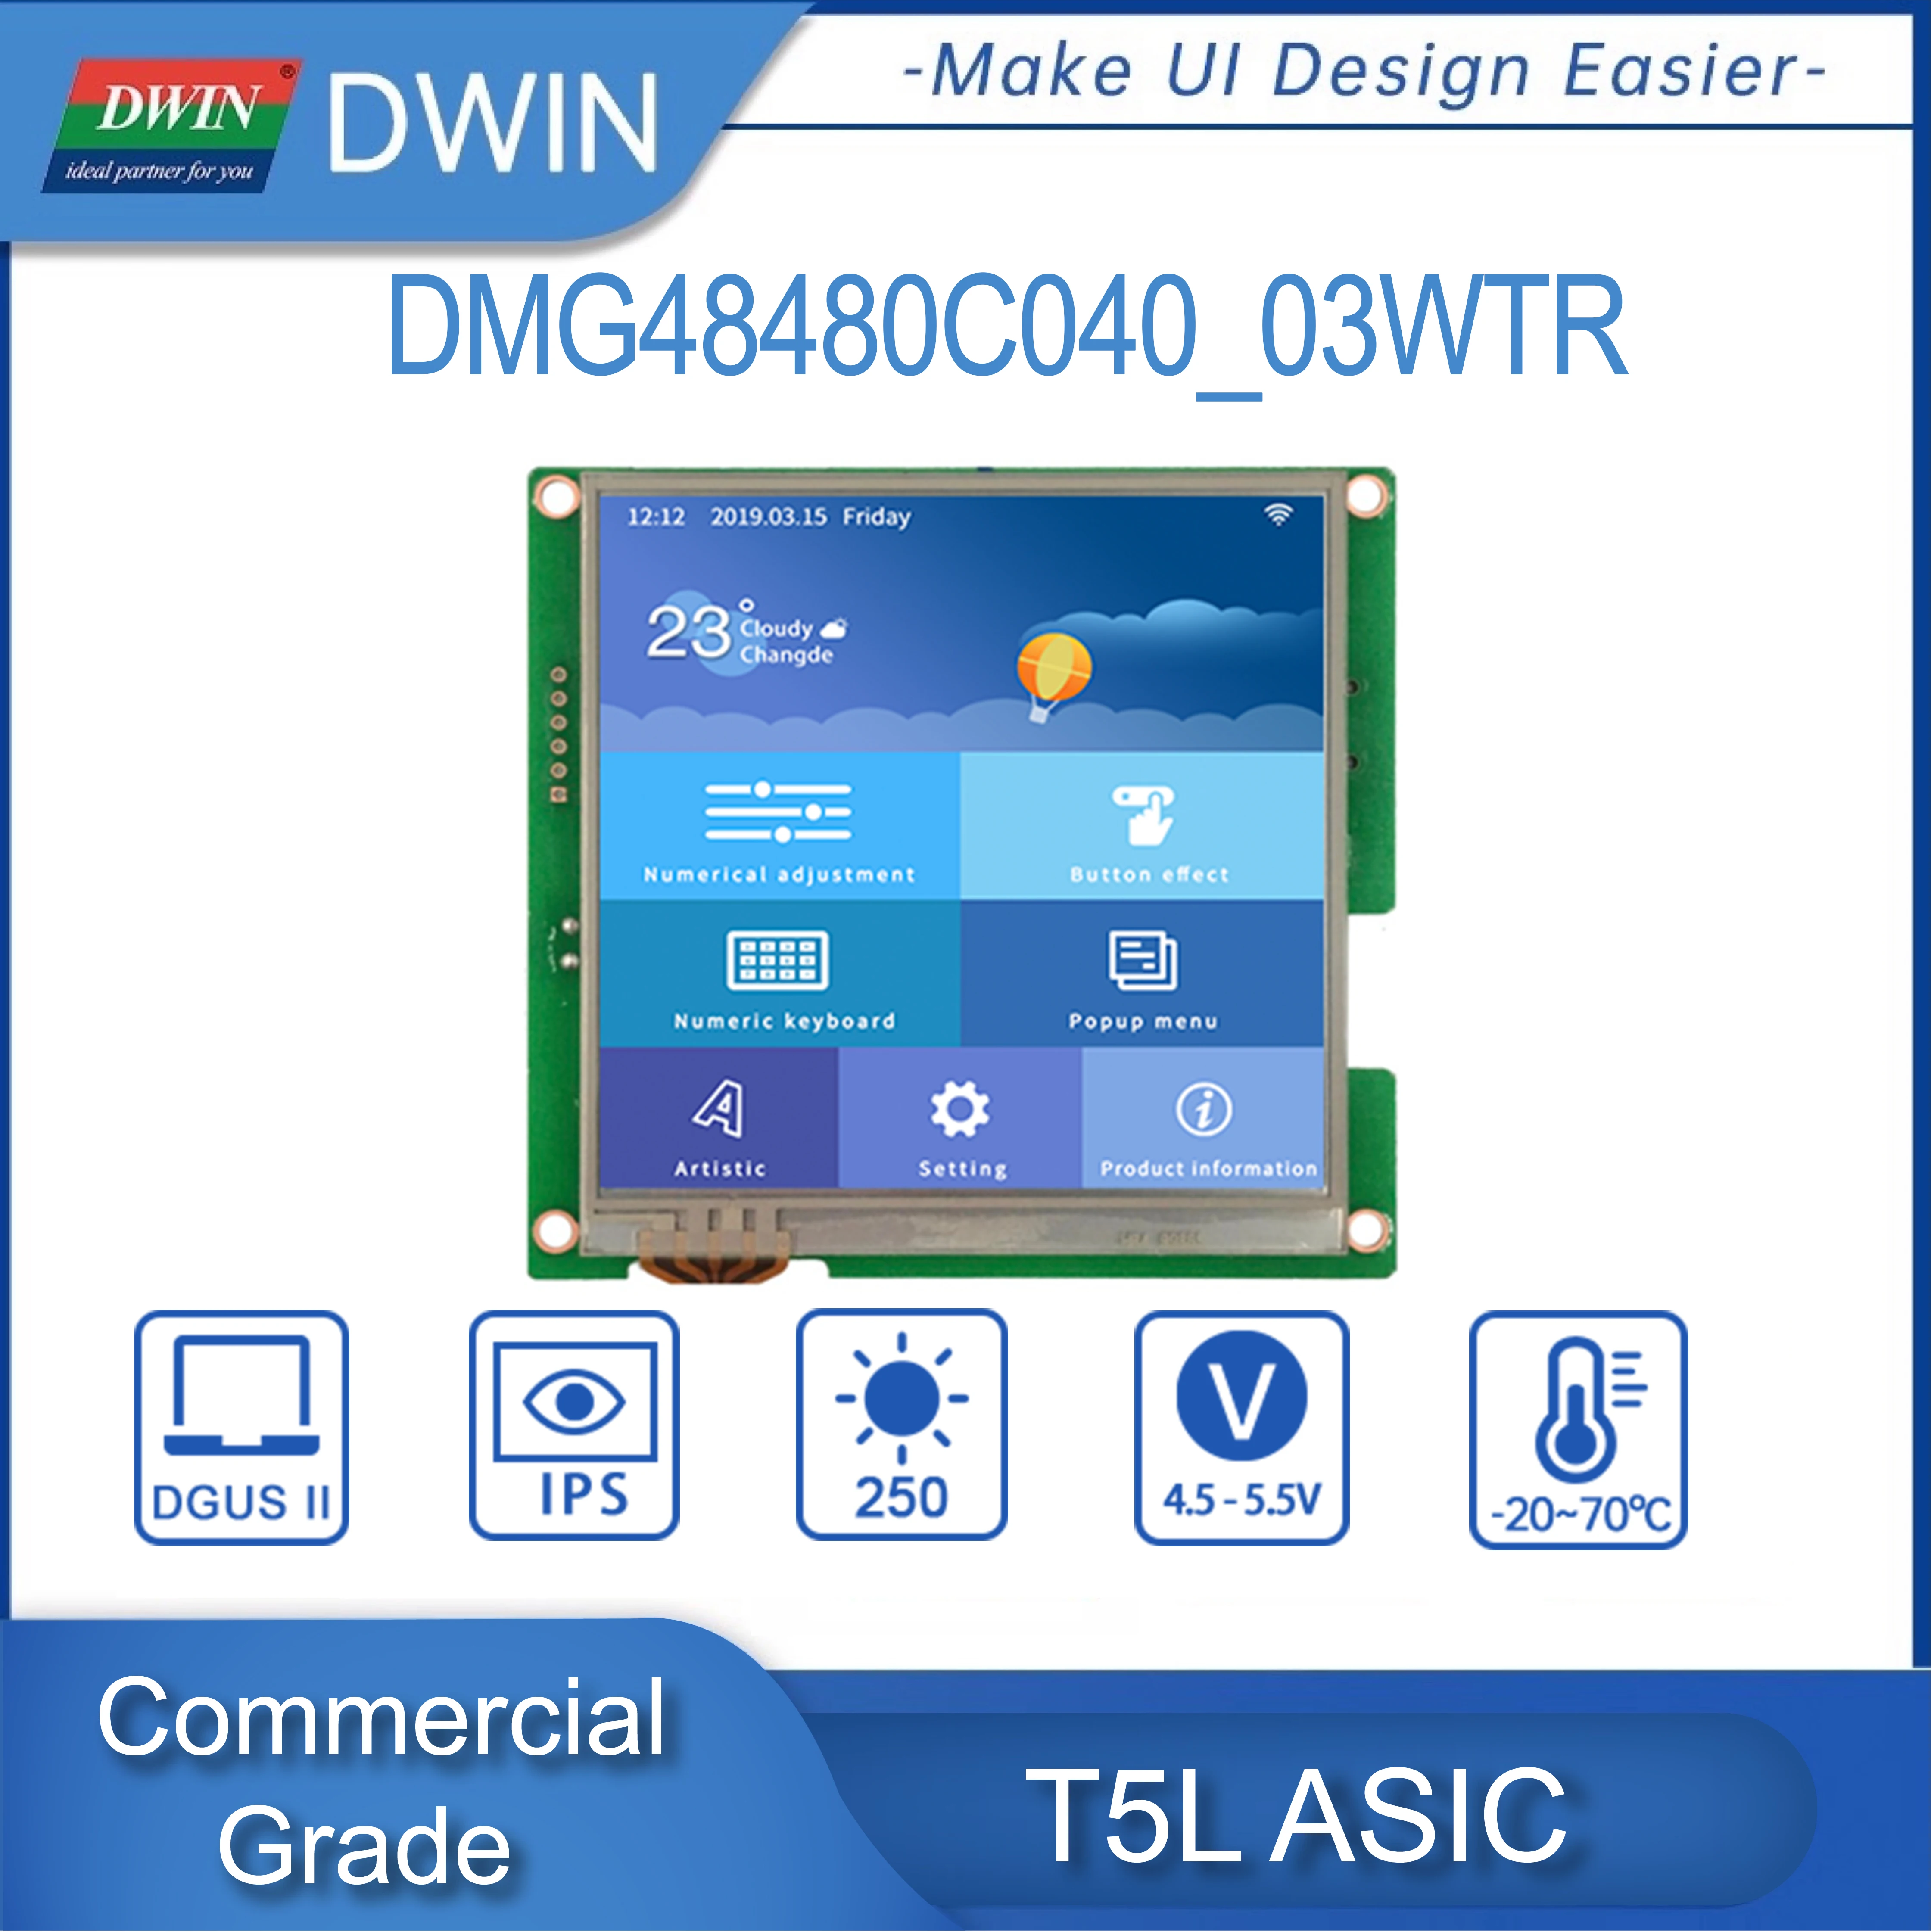 DWIN 4 Inch 480*480 Square LCD Display Commercial Grade HMI Smart Touch Screen UART Serial 250nit LCD Module DMG48480C040_03W images - 6